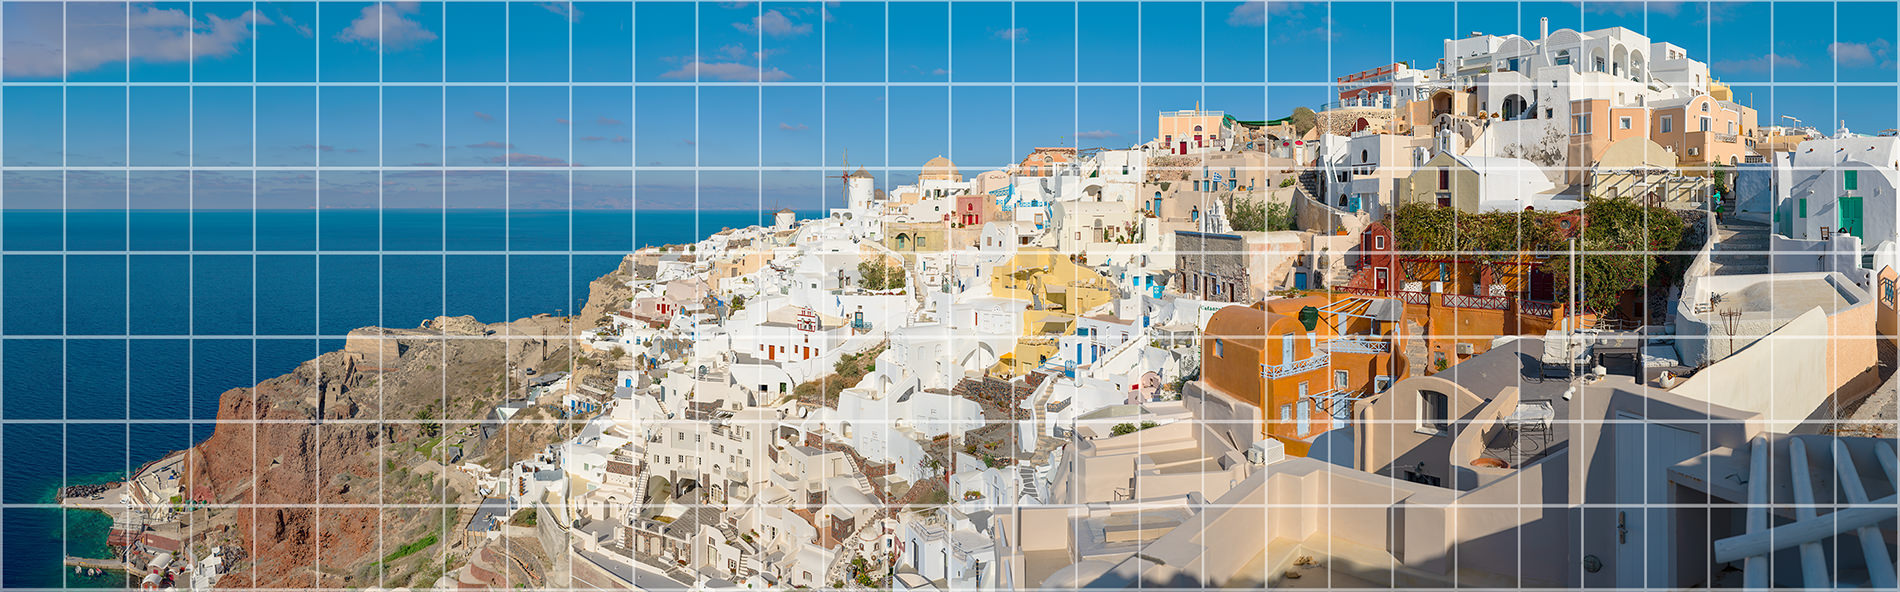 Panorama showing how photographs are shot in rows and columbs to make a stitched giapixel